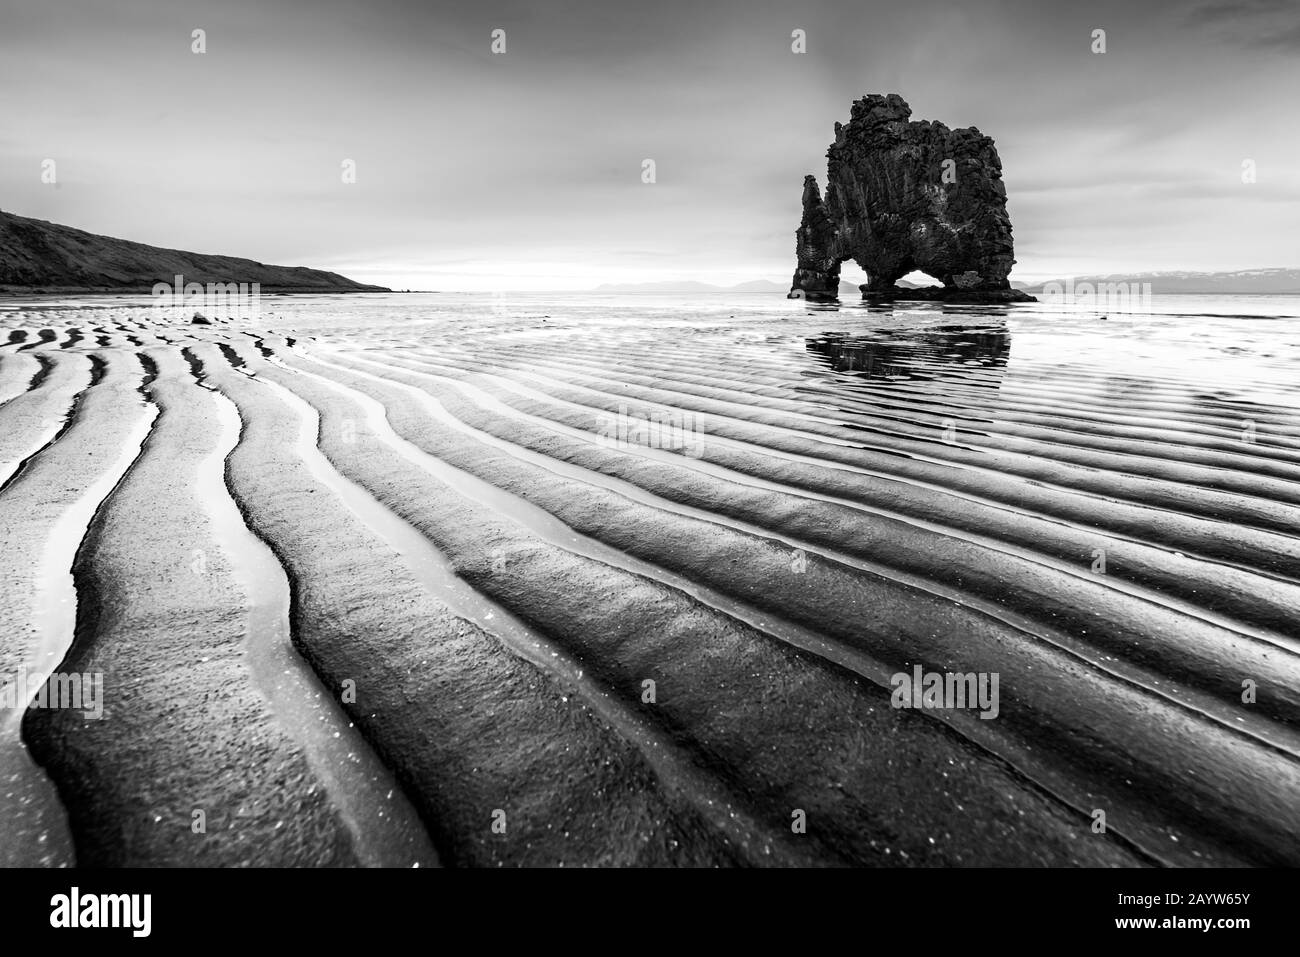 Drammatic landscape with famous Hvitserkur rock and dark wavy sand after the tide. Vatnsnes peninsula, Iceland, Europe. Black and white photo Stock Photo